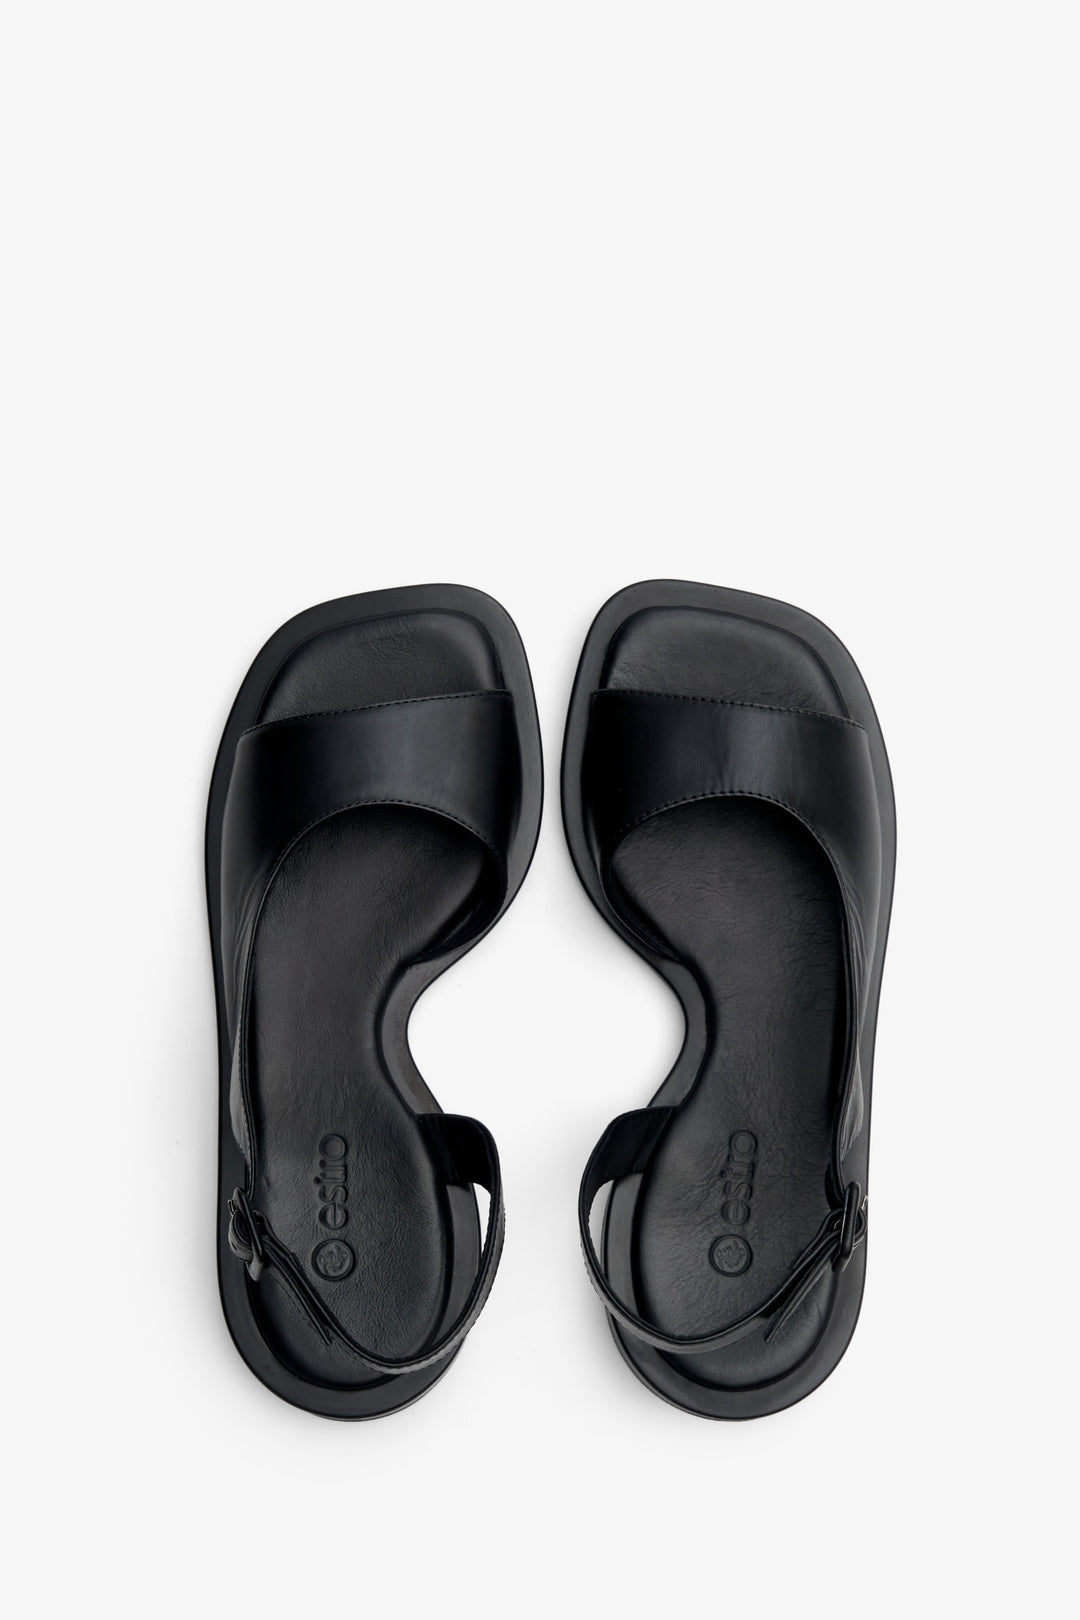 Women's sandals in black in natural leather Estro - presentation of the model from above.